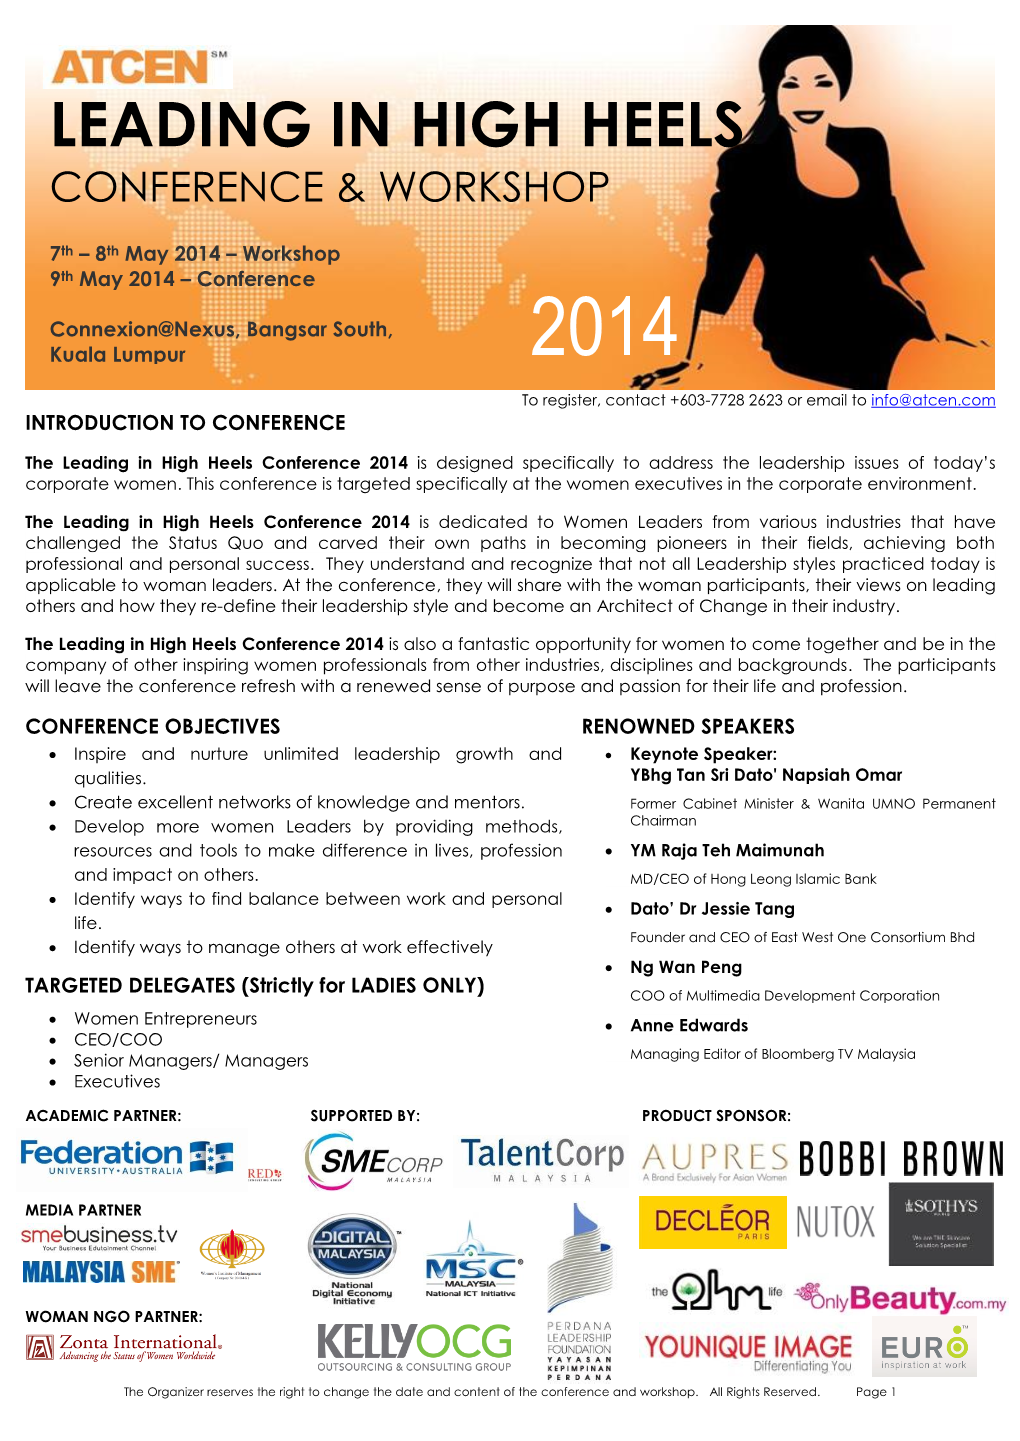 LEADING in HIGH HEELS Conference and Workshop 7Th - 9Th May 2014, Connexion@Nexus, Bangsar South, Kuala Lumpur